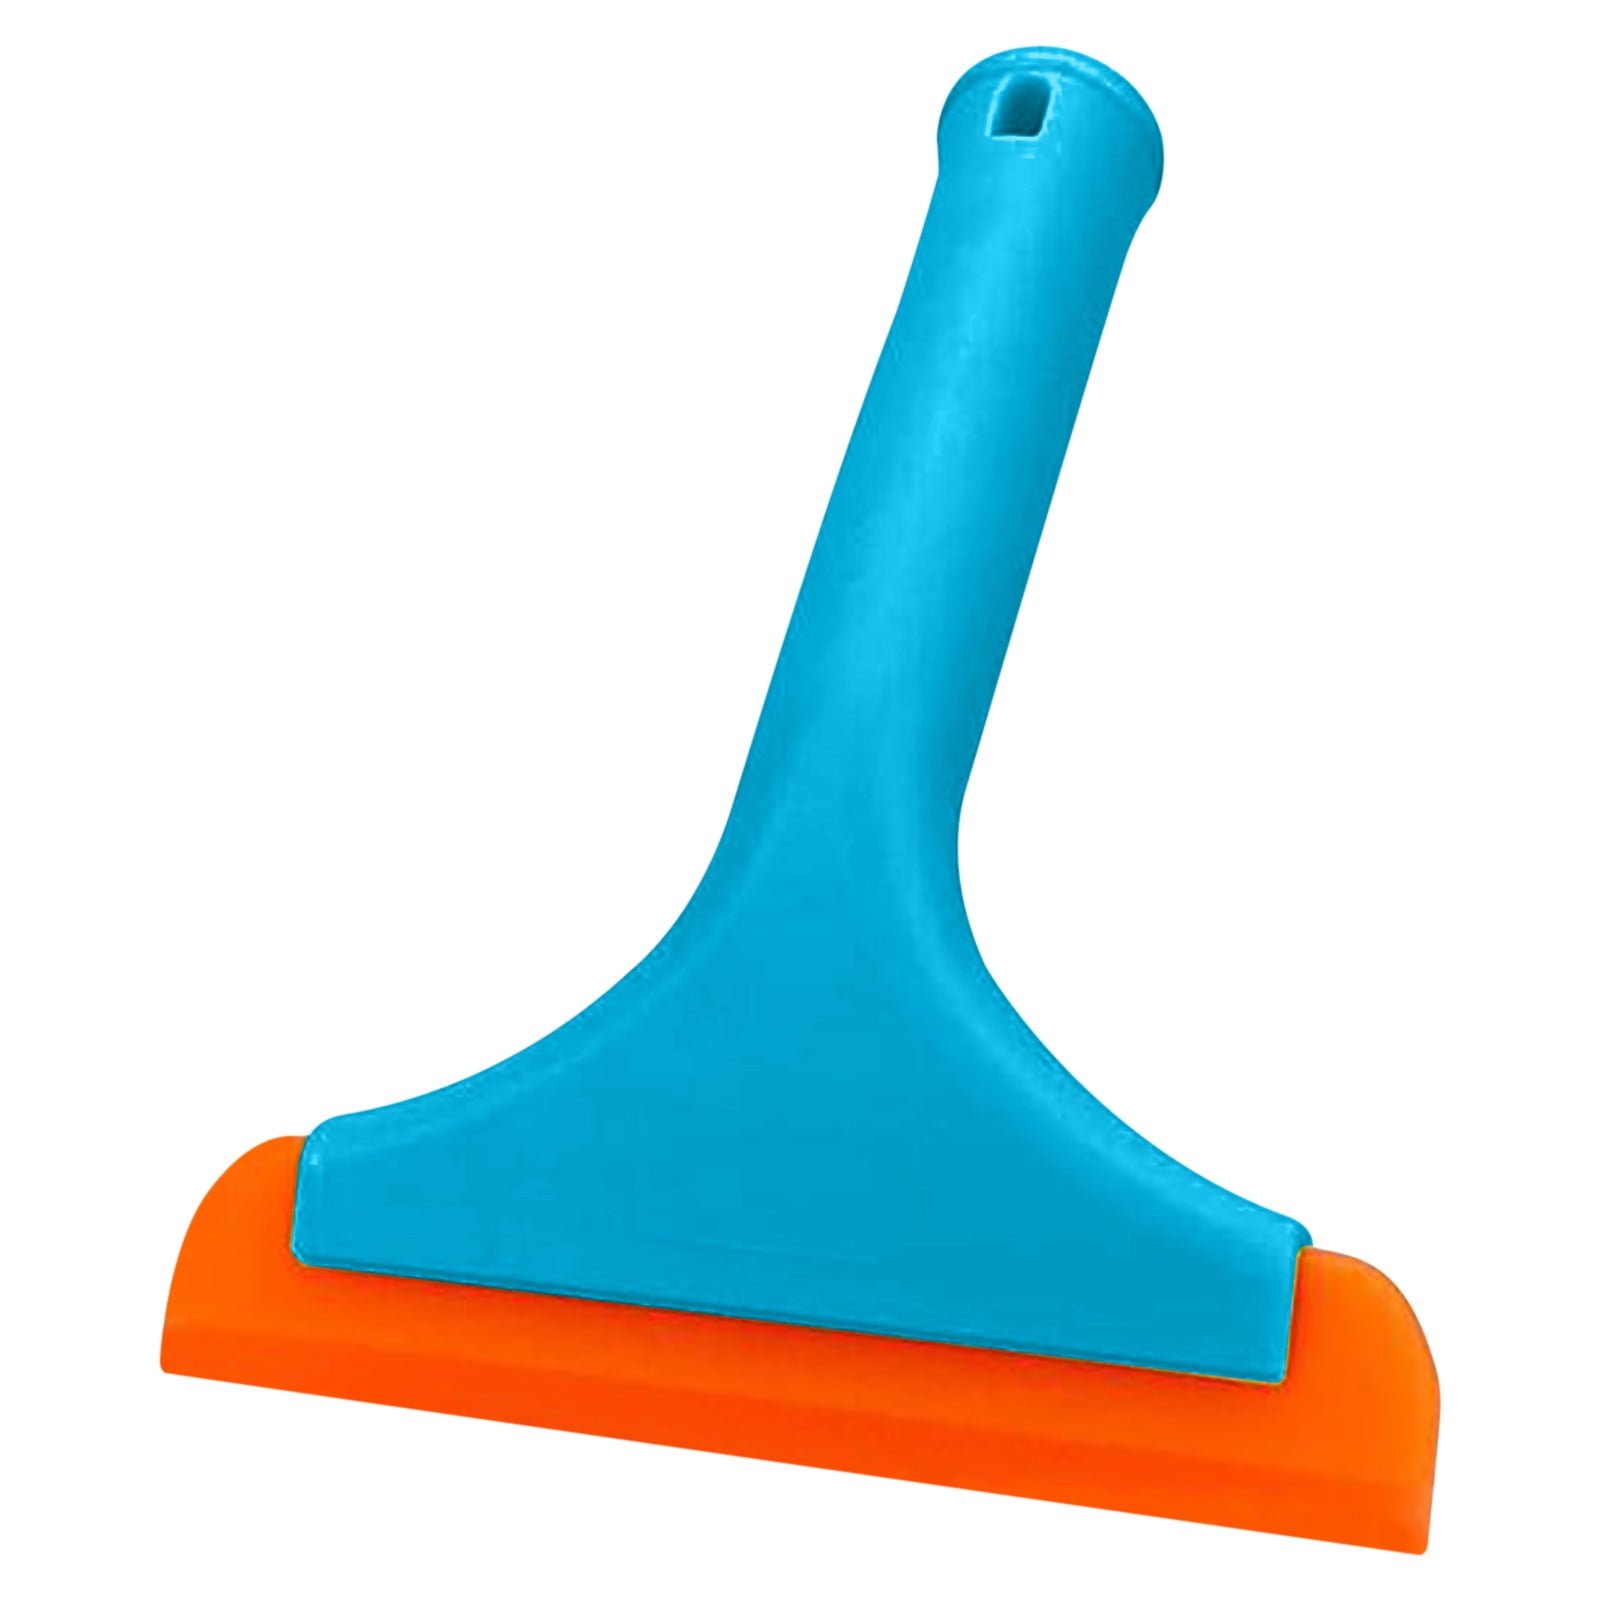  MORNIIE Curved Small Squeegee, Mini Squeegee. Kitchen